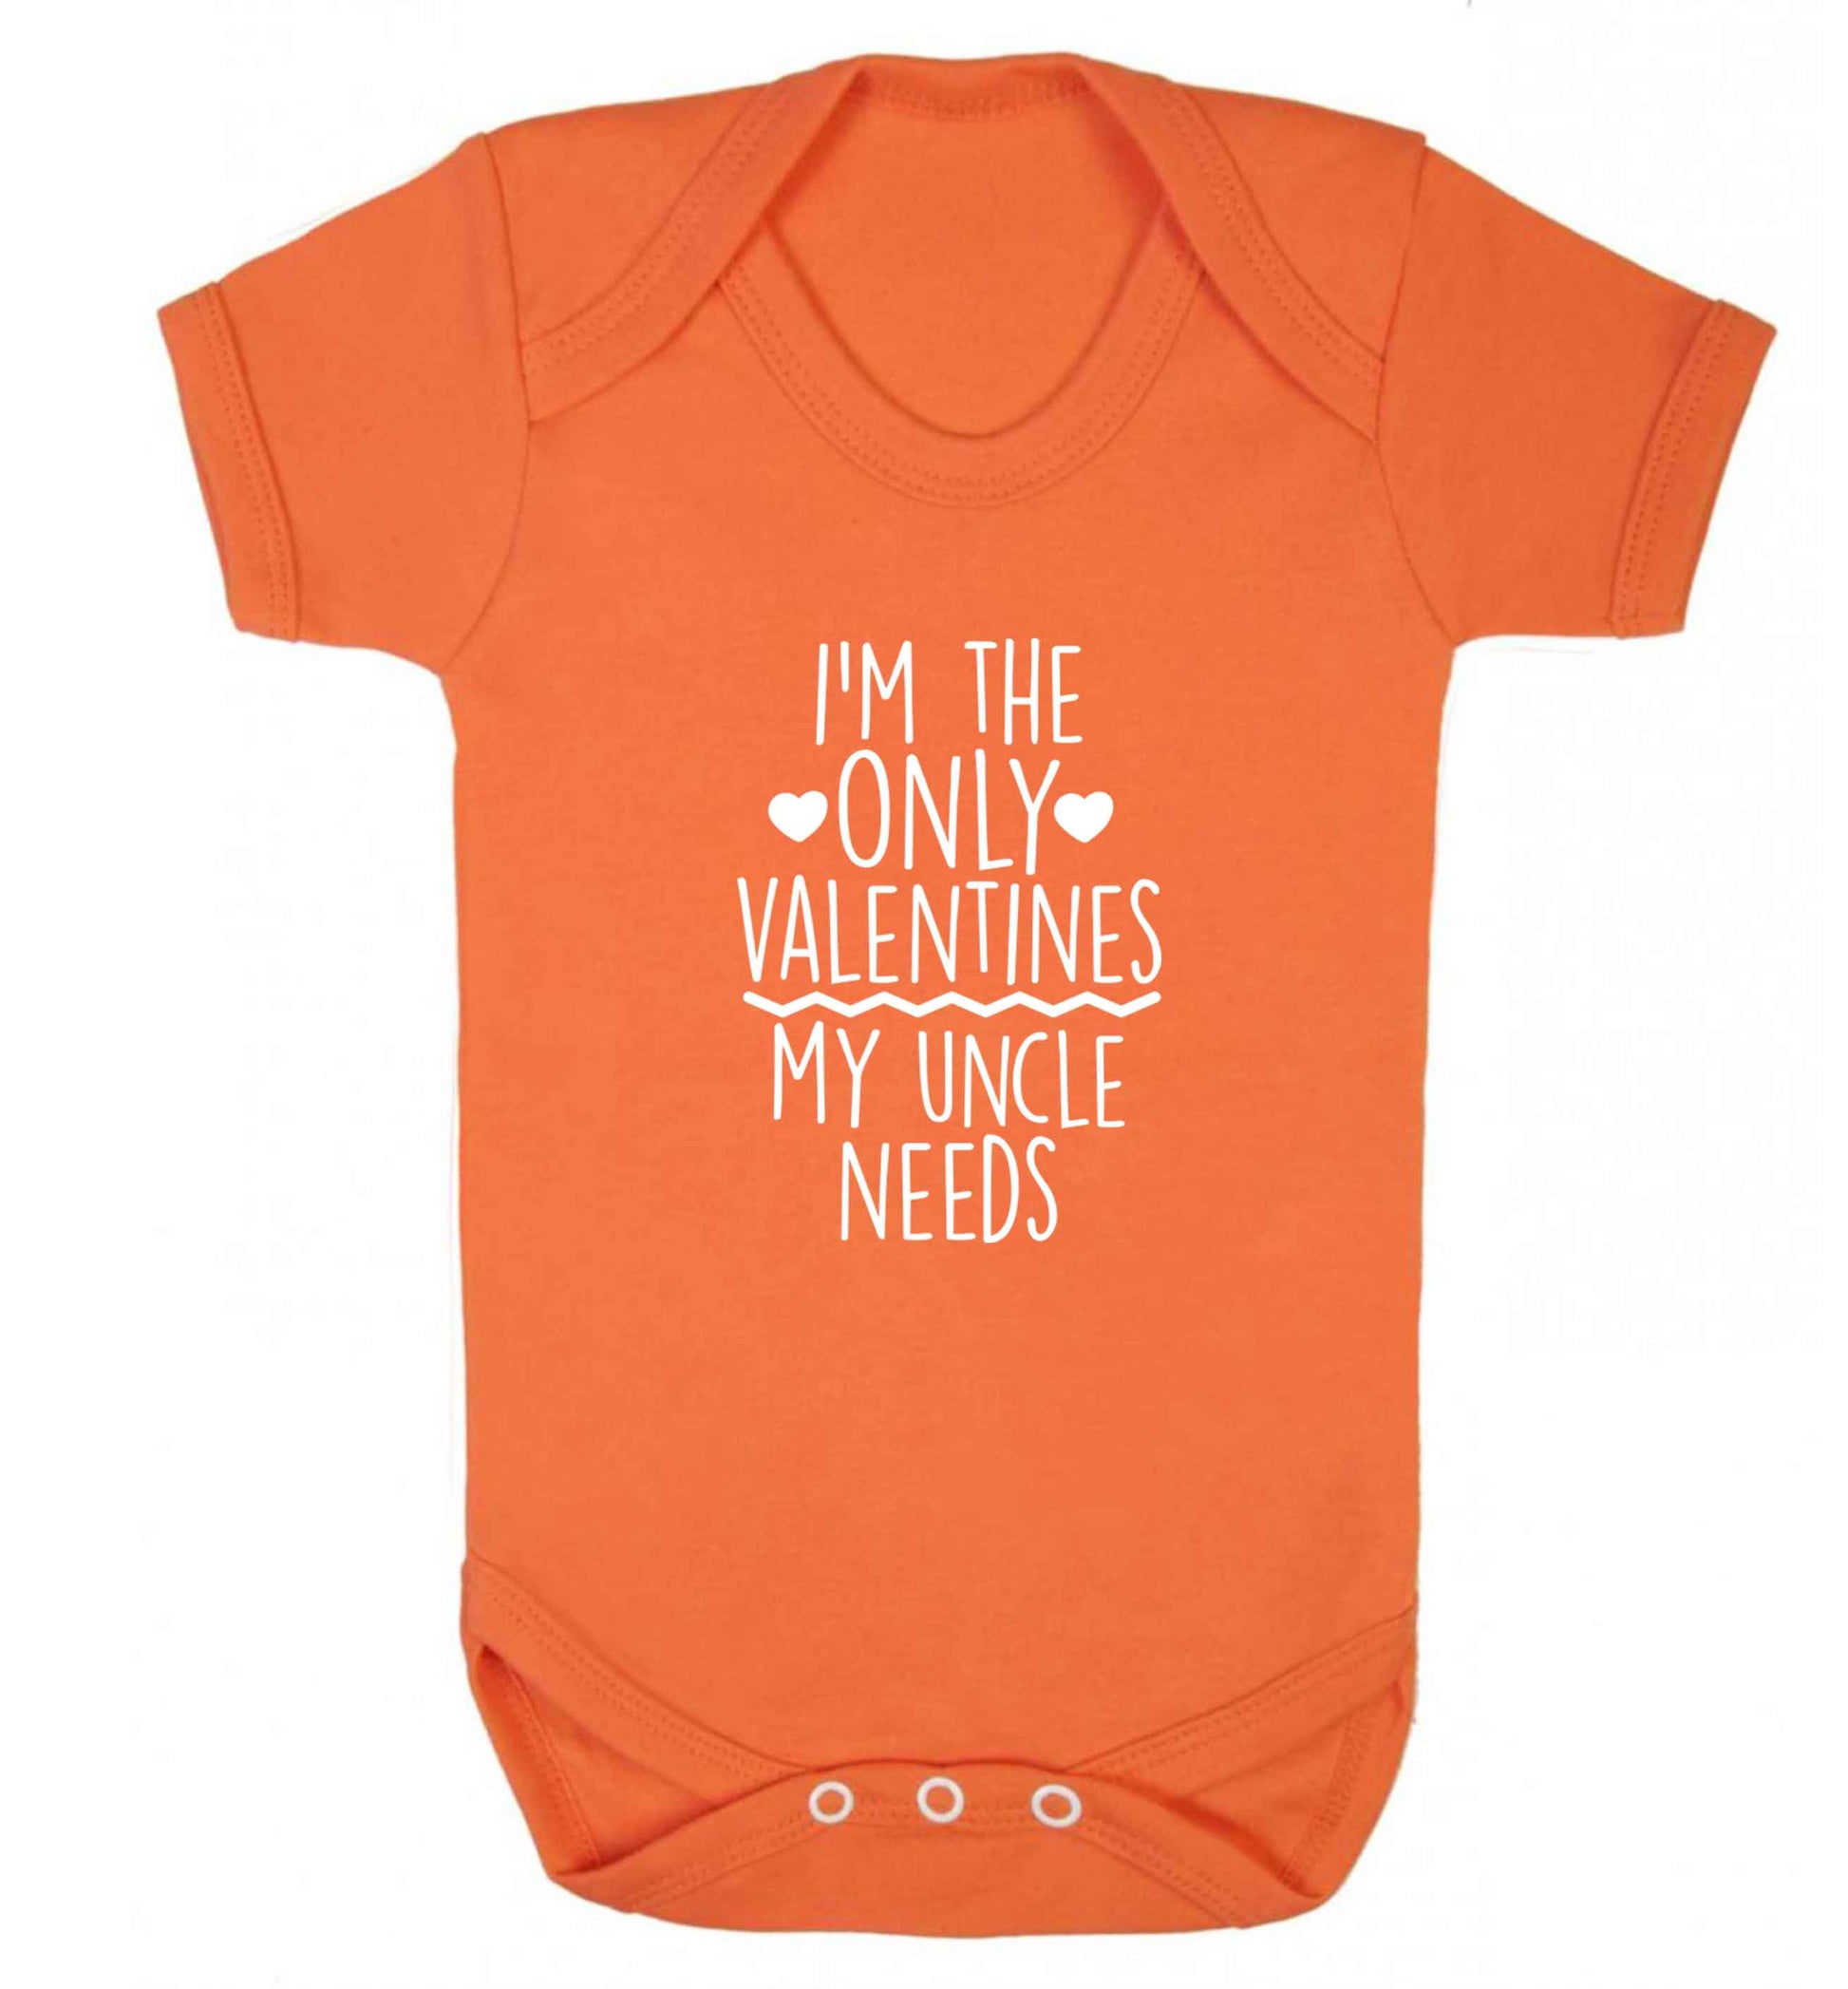 I'm the only valentines my uncle needs baby vest orange 18-24 months